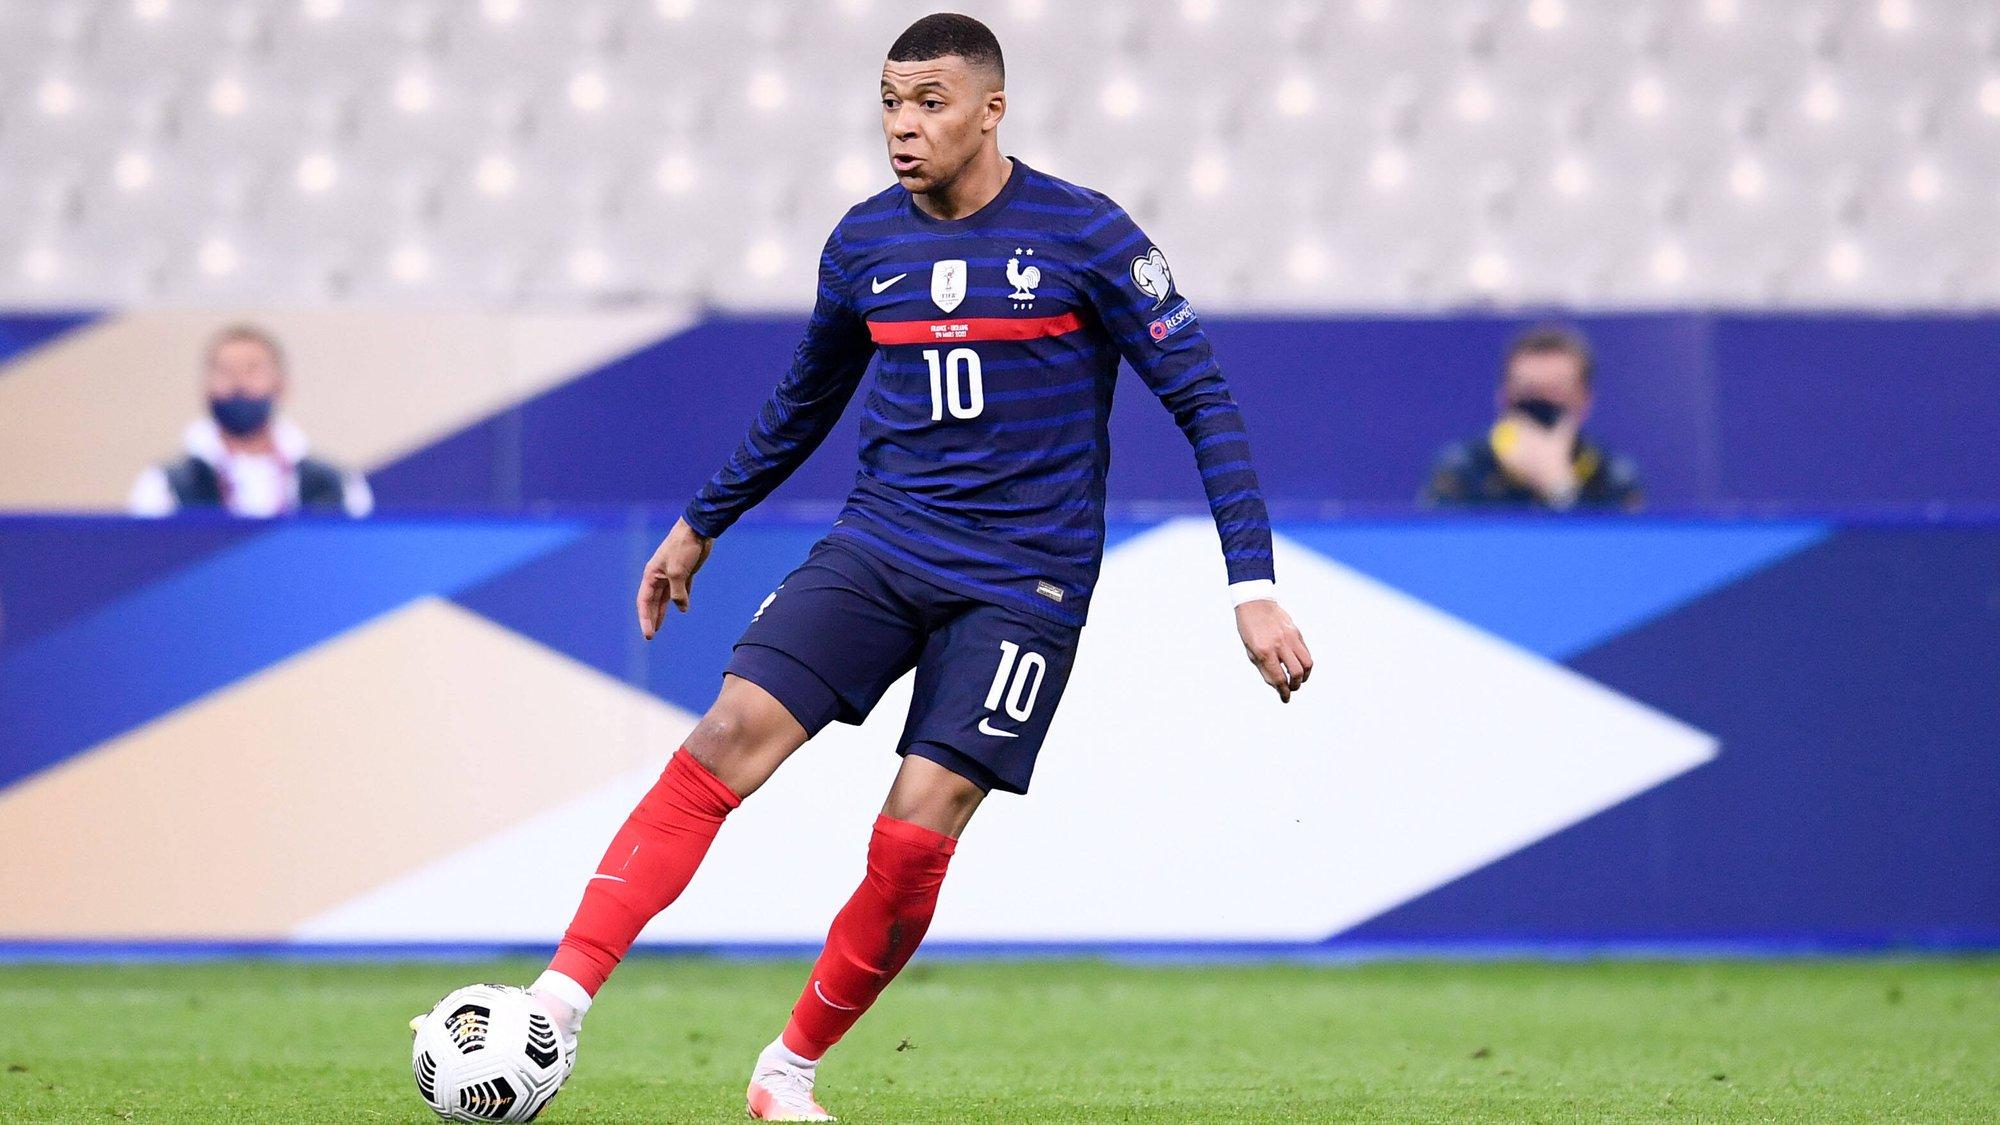 Euro 2020 Group F Preview and Best Bets: Will favored France top Group F ahead of Germany and Portugal?